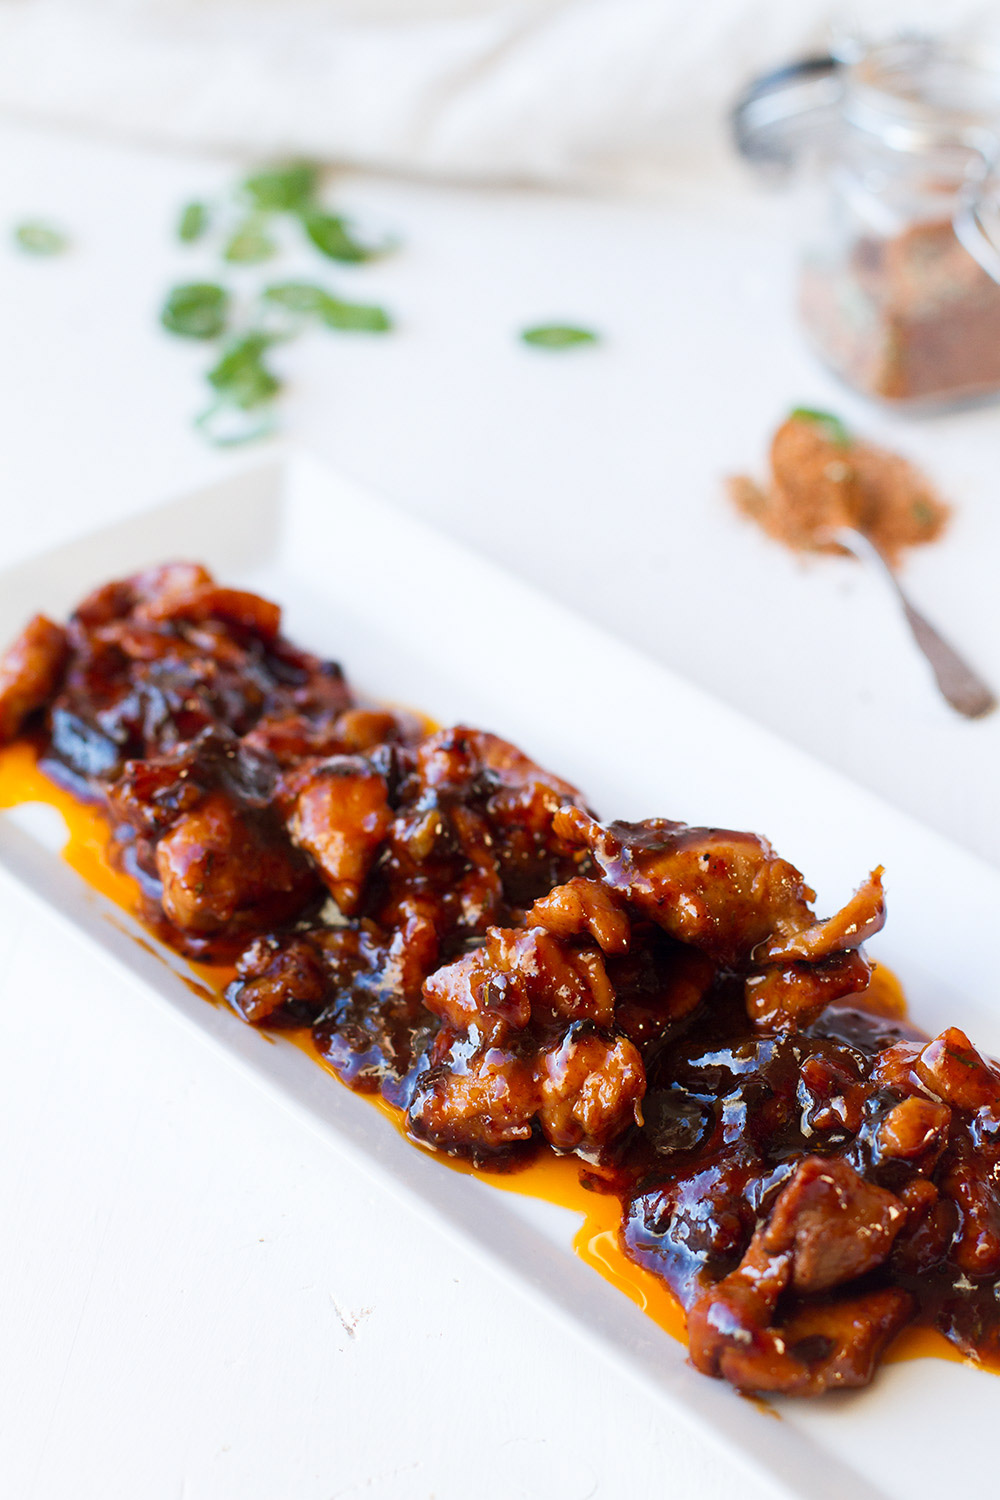 Pork strips on a rectangular plate, in a sweet and spicy sauce.